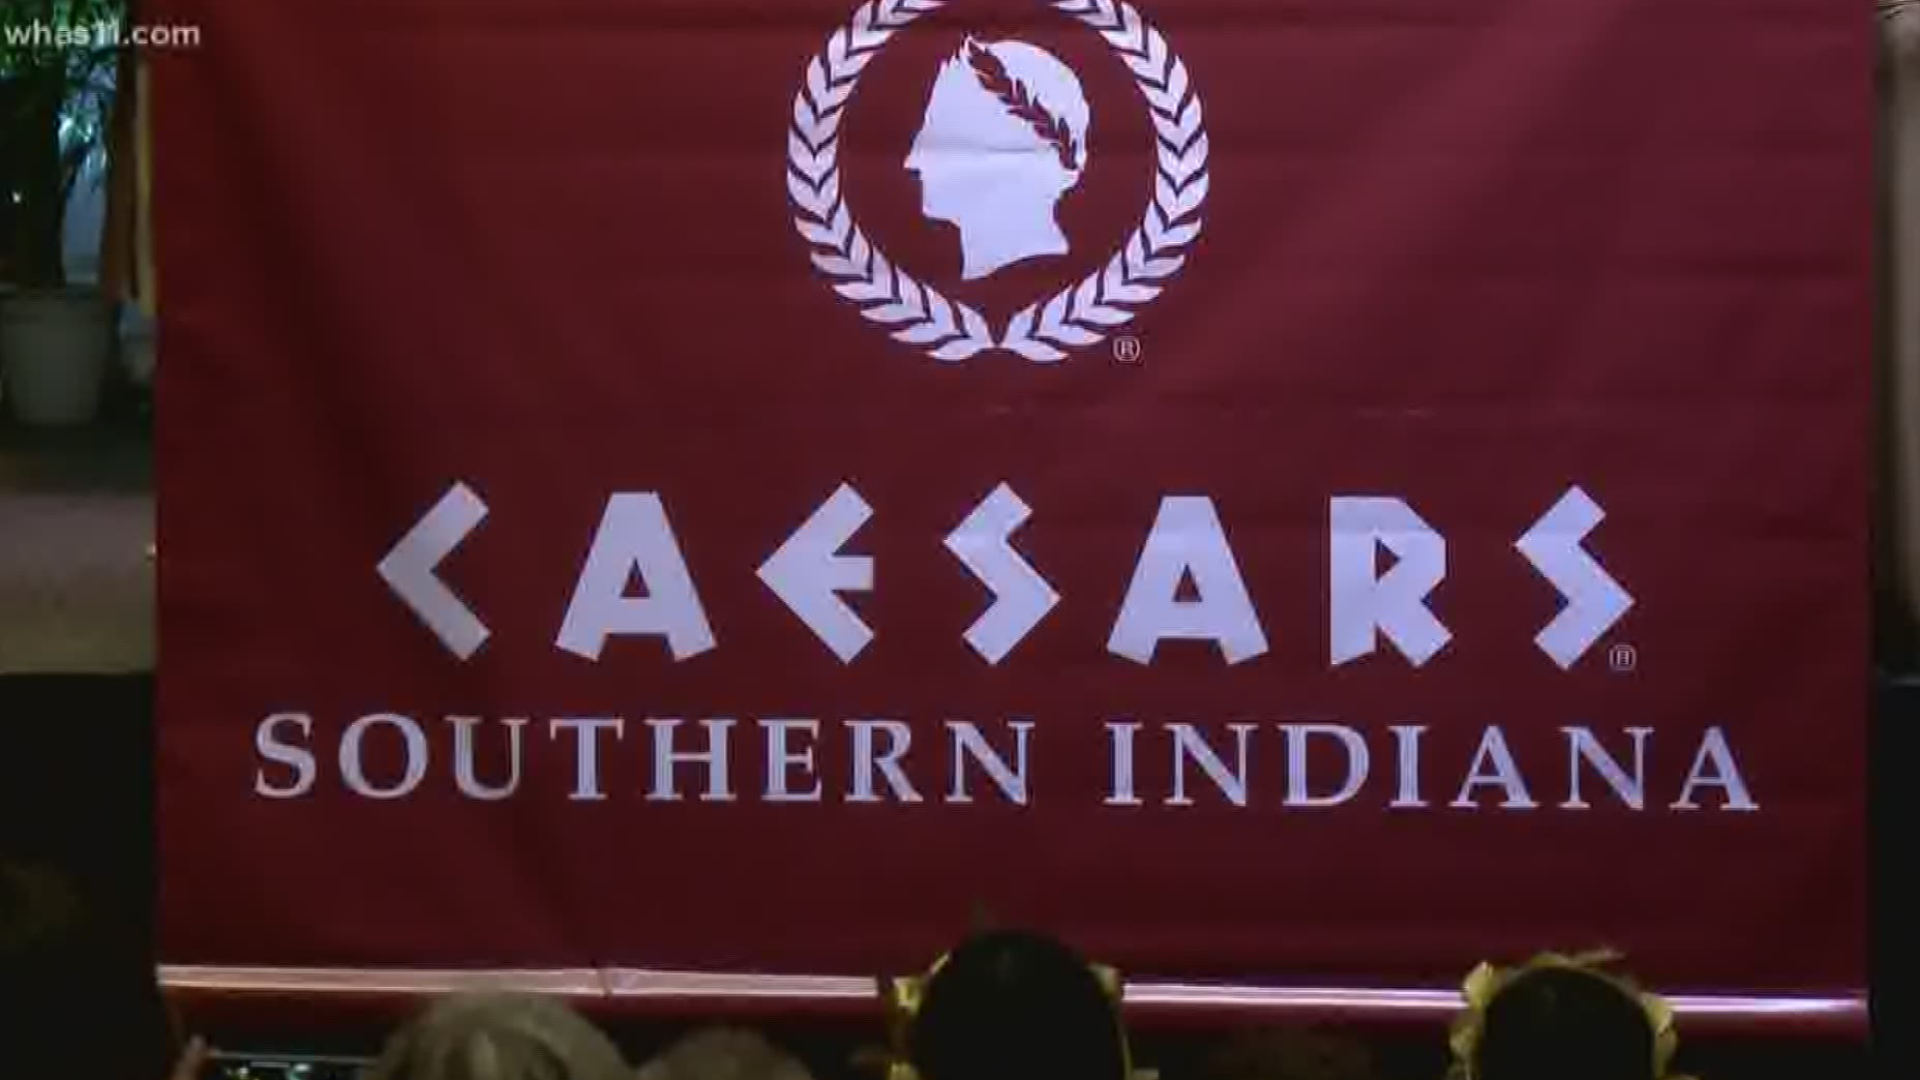 The Casino will be re-branded as Caesars Southern Indiana and will soon offer a sportsbook for on-site sports betting.